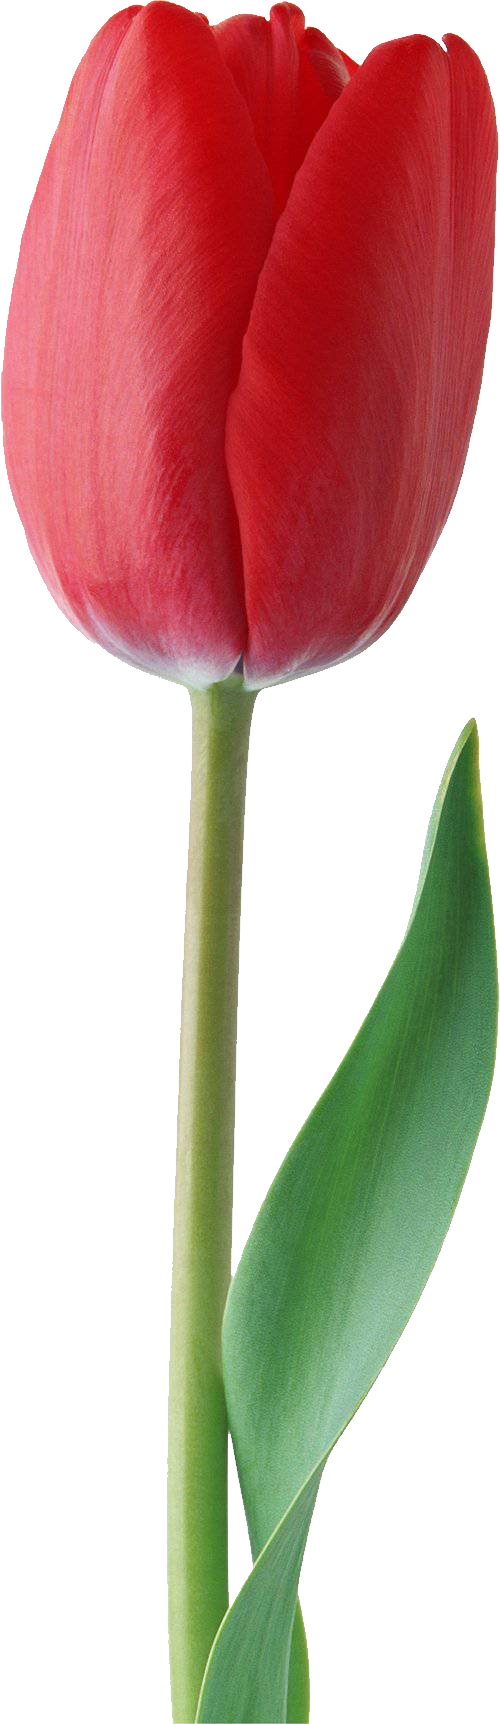 Red tulip PNG image